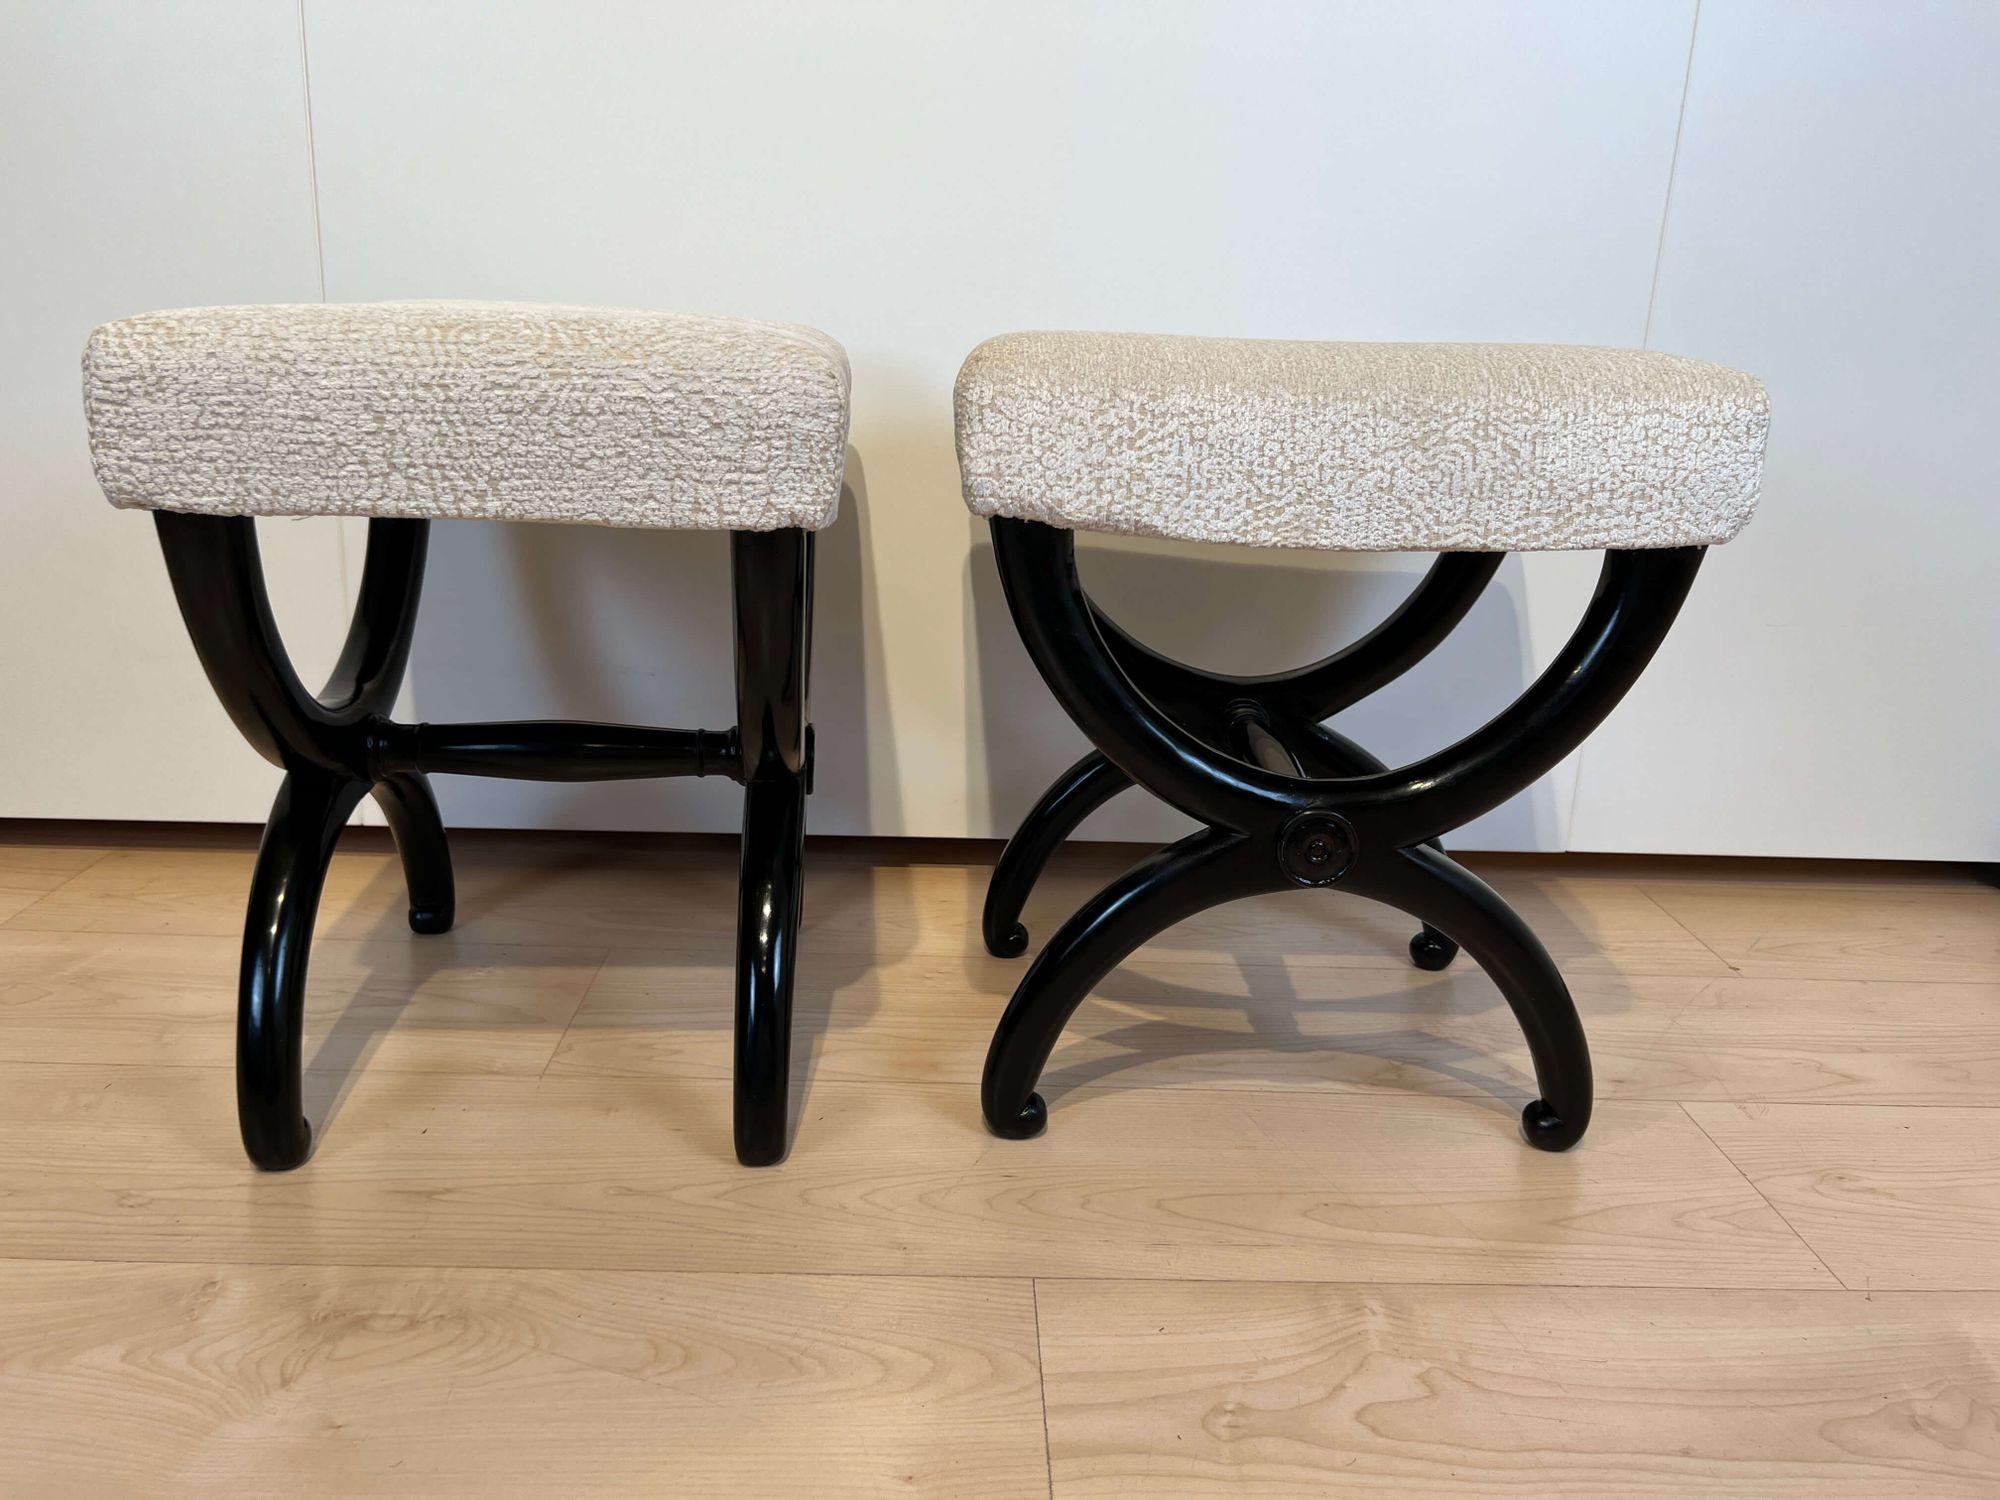 Pair of Antique Stools, Ebonized Beech Wood, Creme Fabric, France circa 1820 In Good Condition For Sale In Regensburg, DE